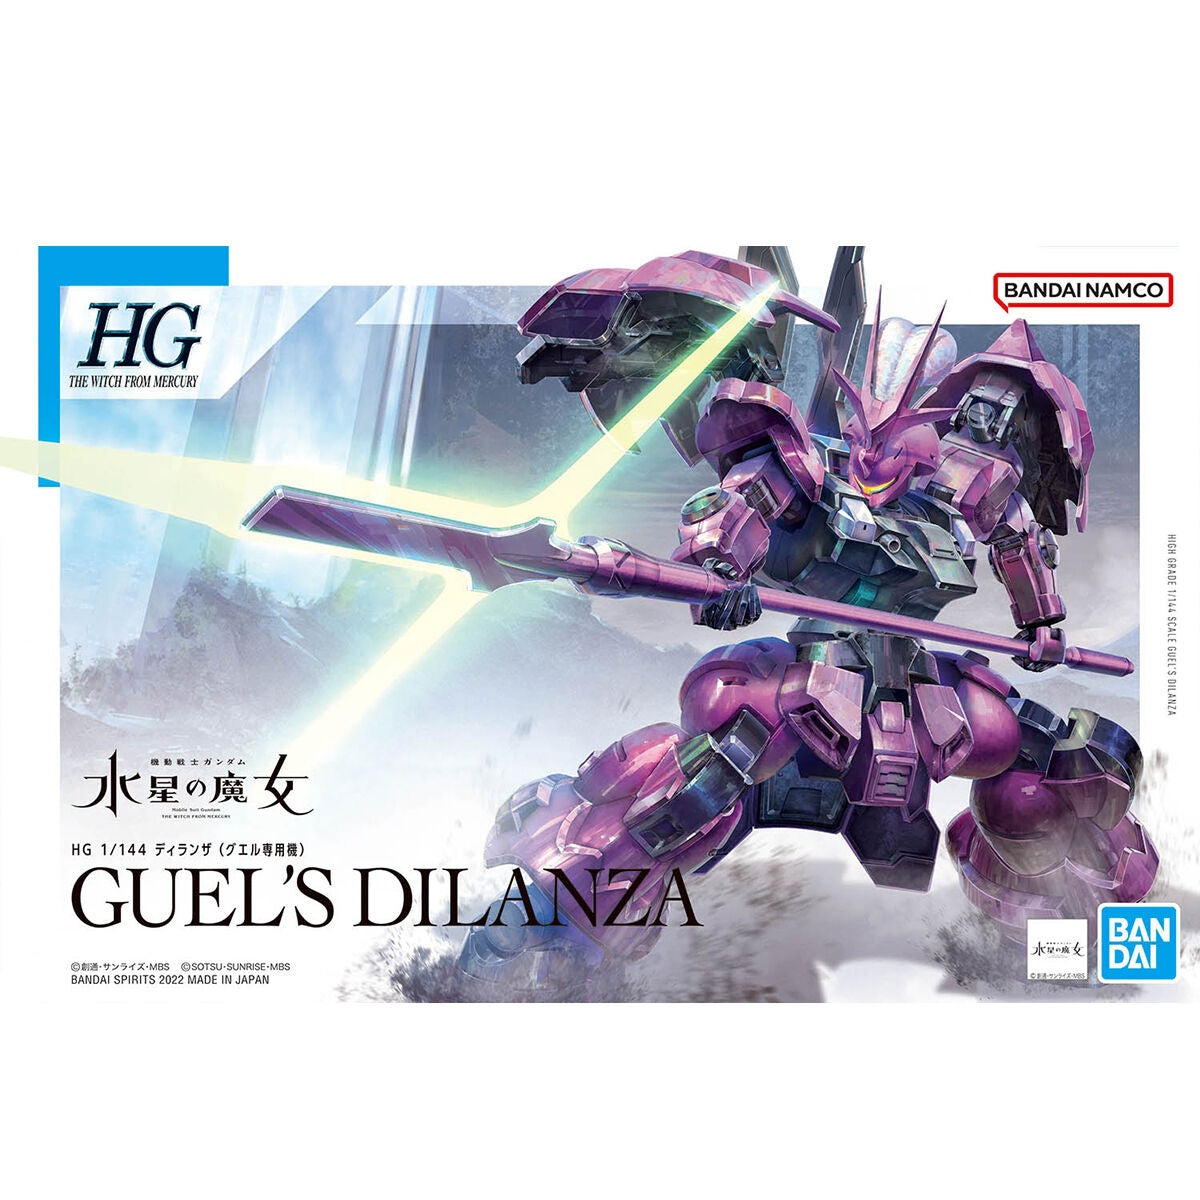 Bandai 1/144 HG Dylanza Guell special machine